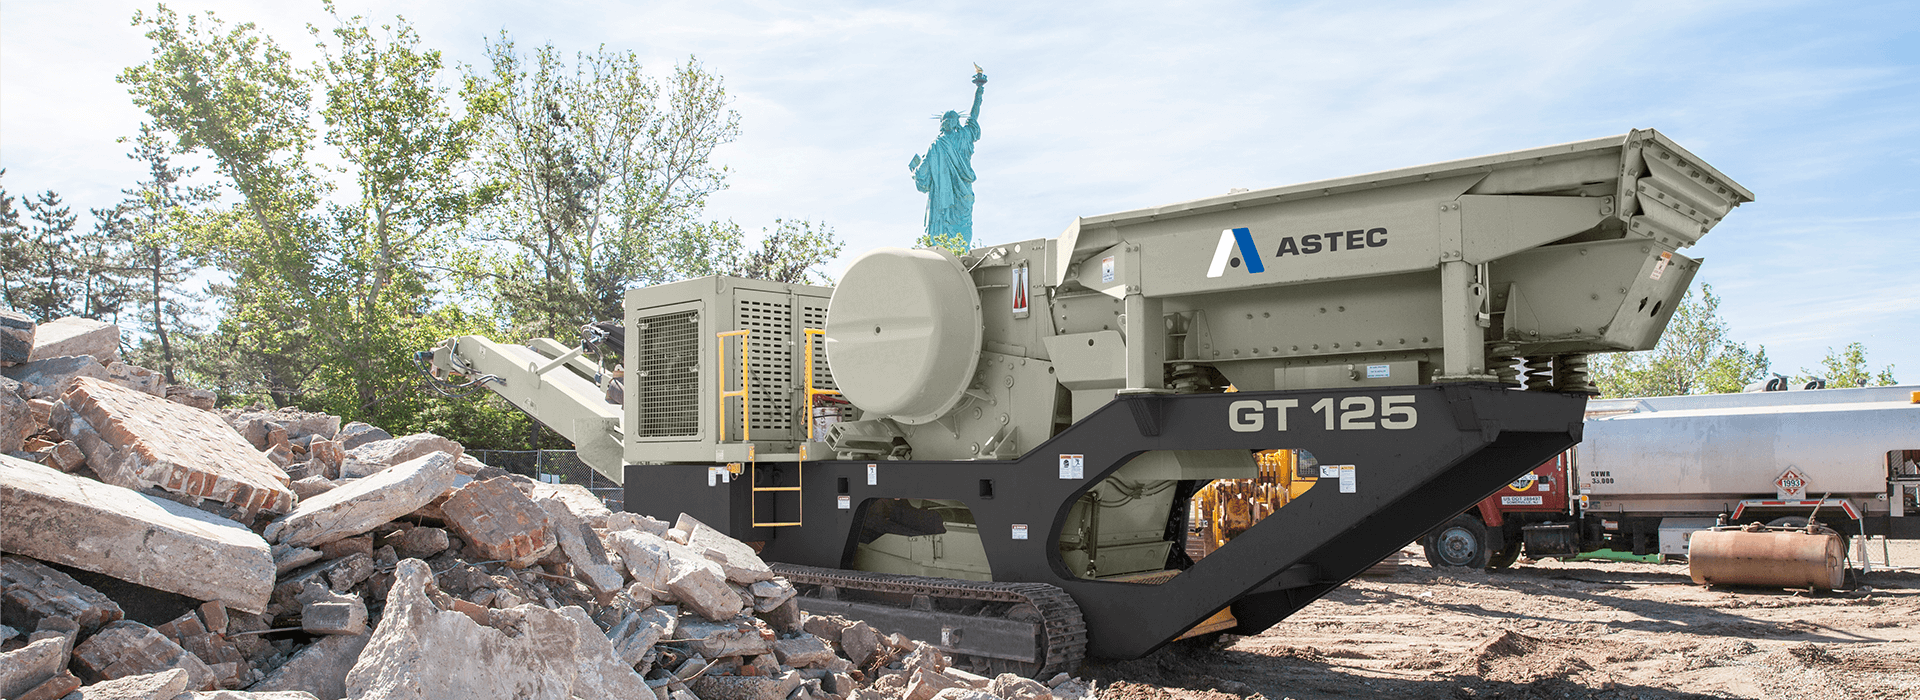 GT125 - Track Mobile Crushing and Screening - Amaco